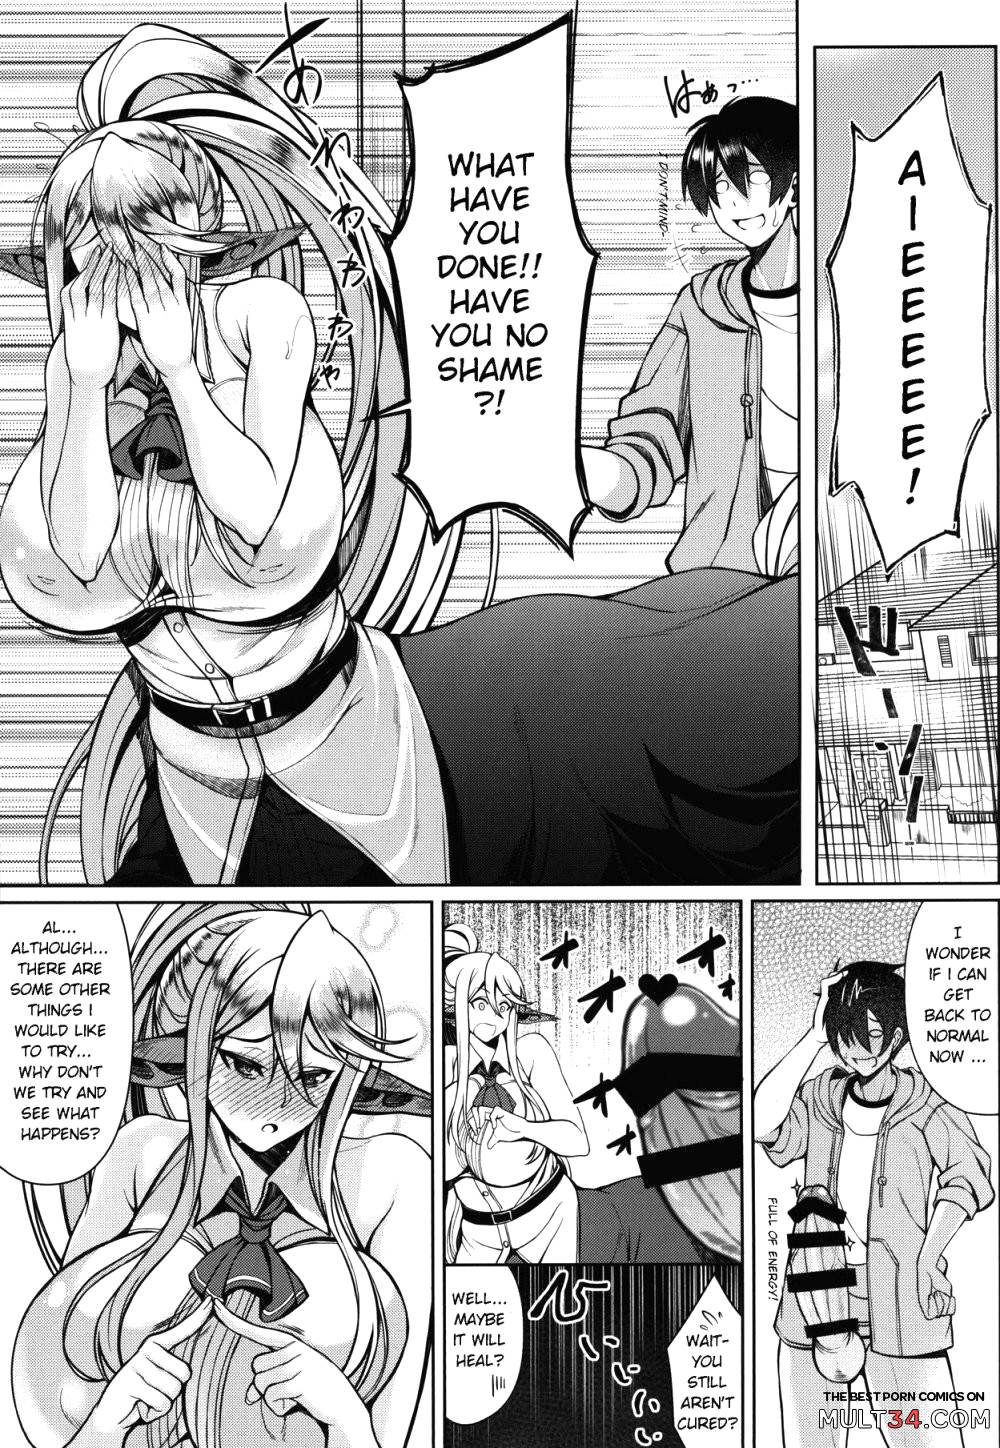 Cerea's H Day page 19